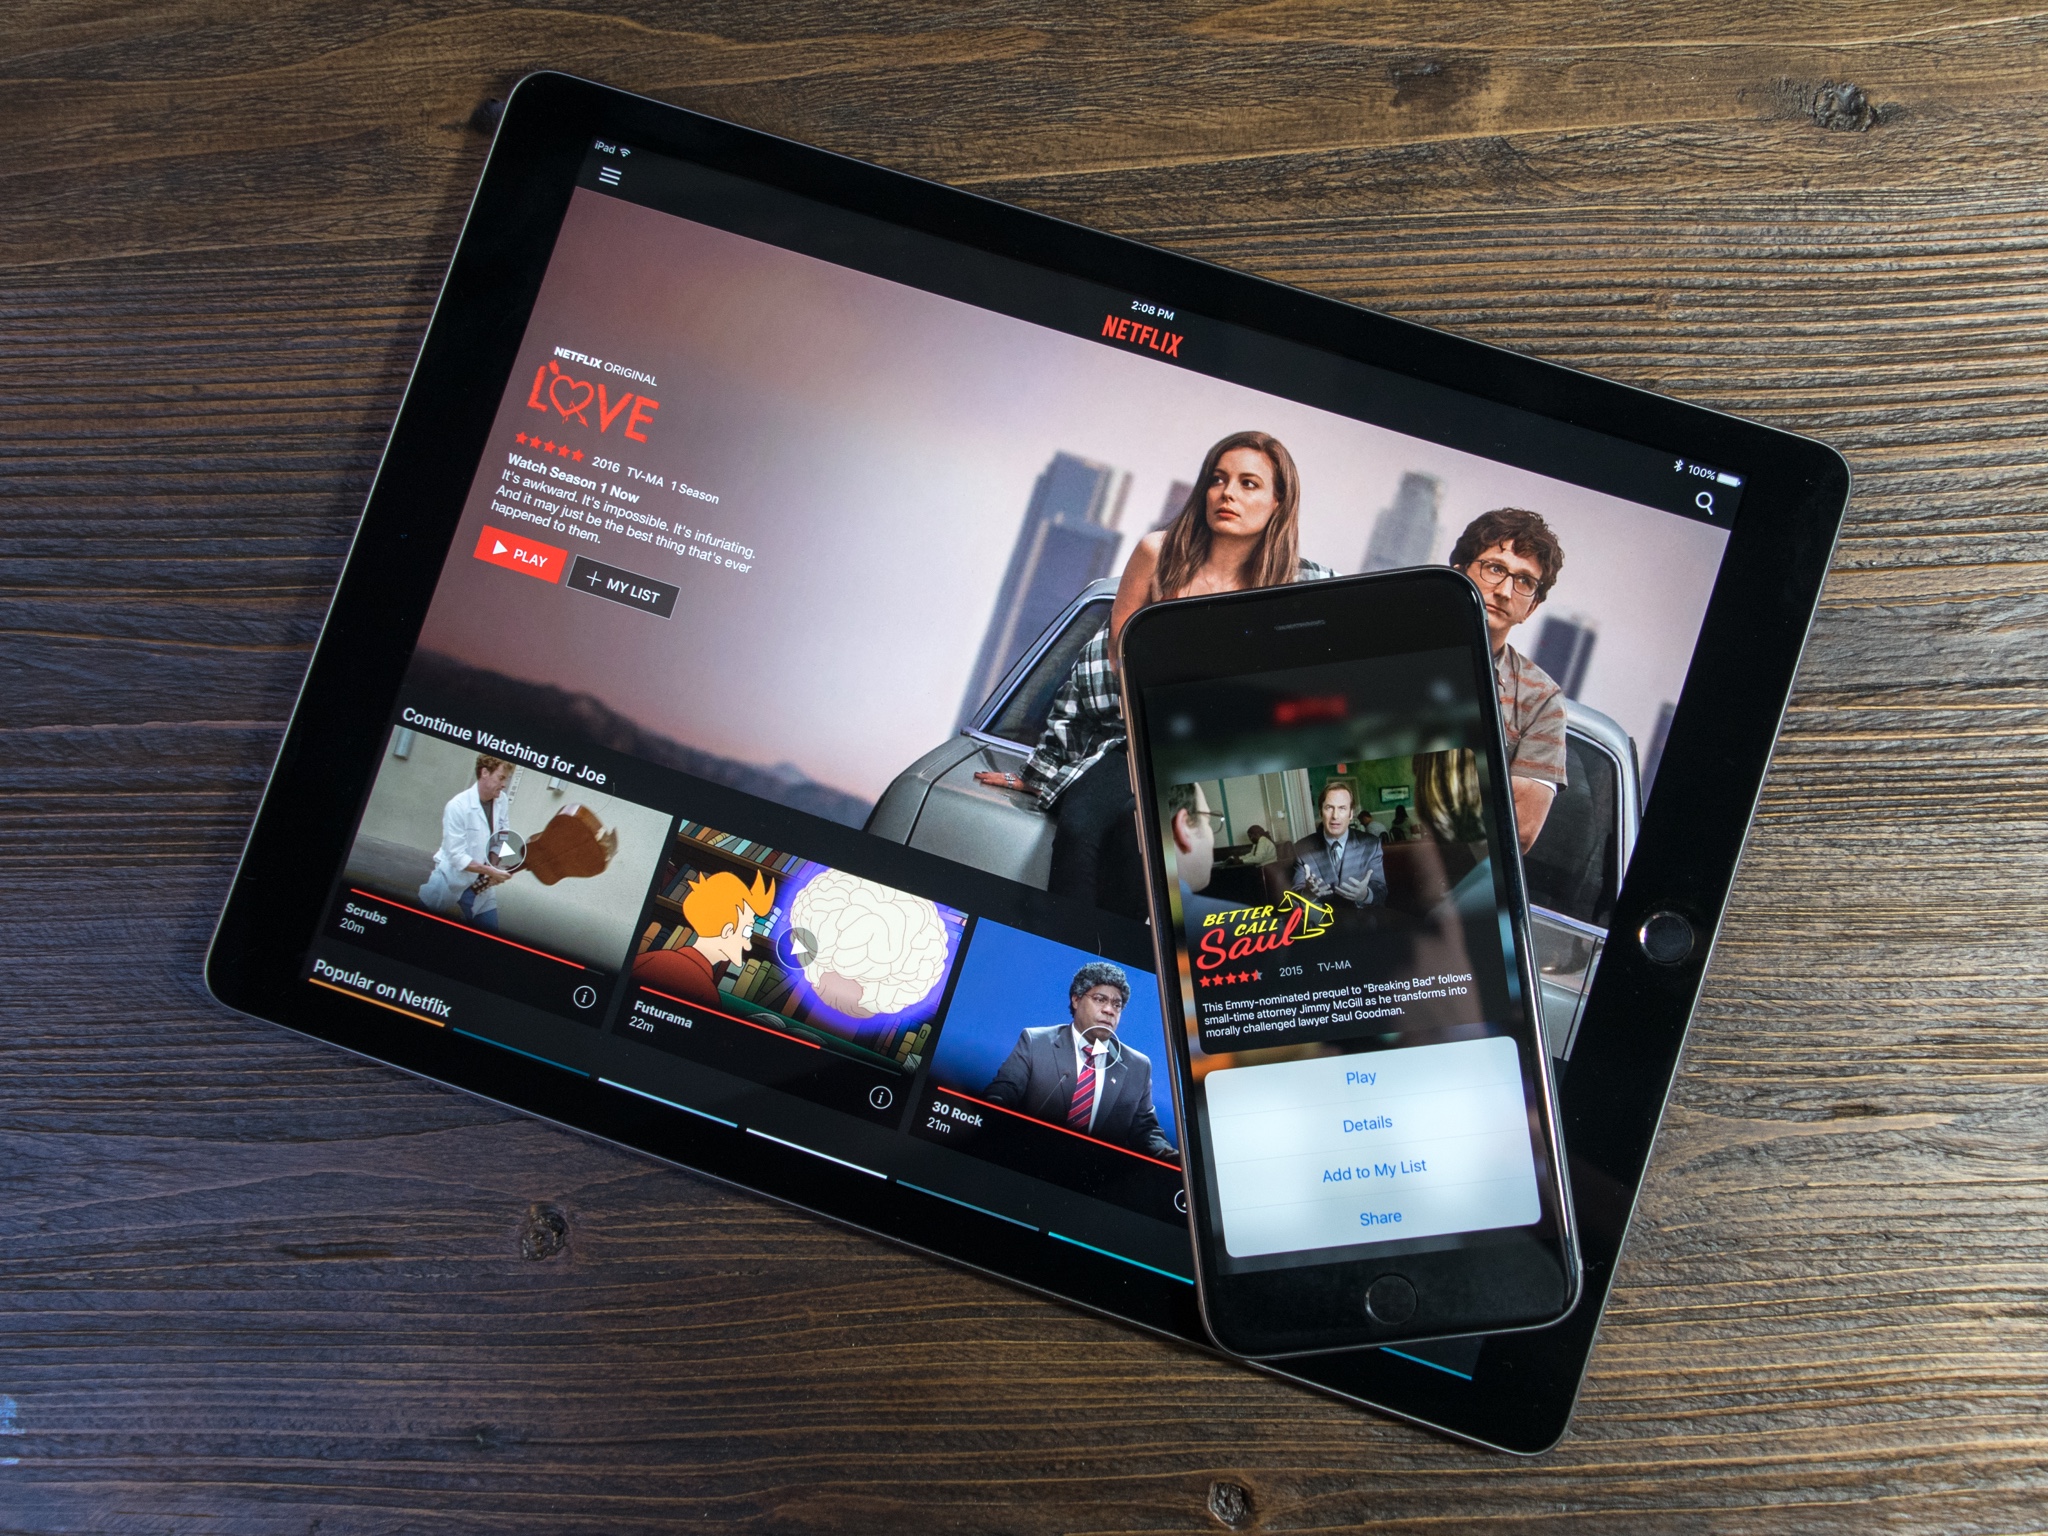 Netflix adds support for 3D Touch and iPad Pro | iMore1600 x 1200